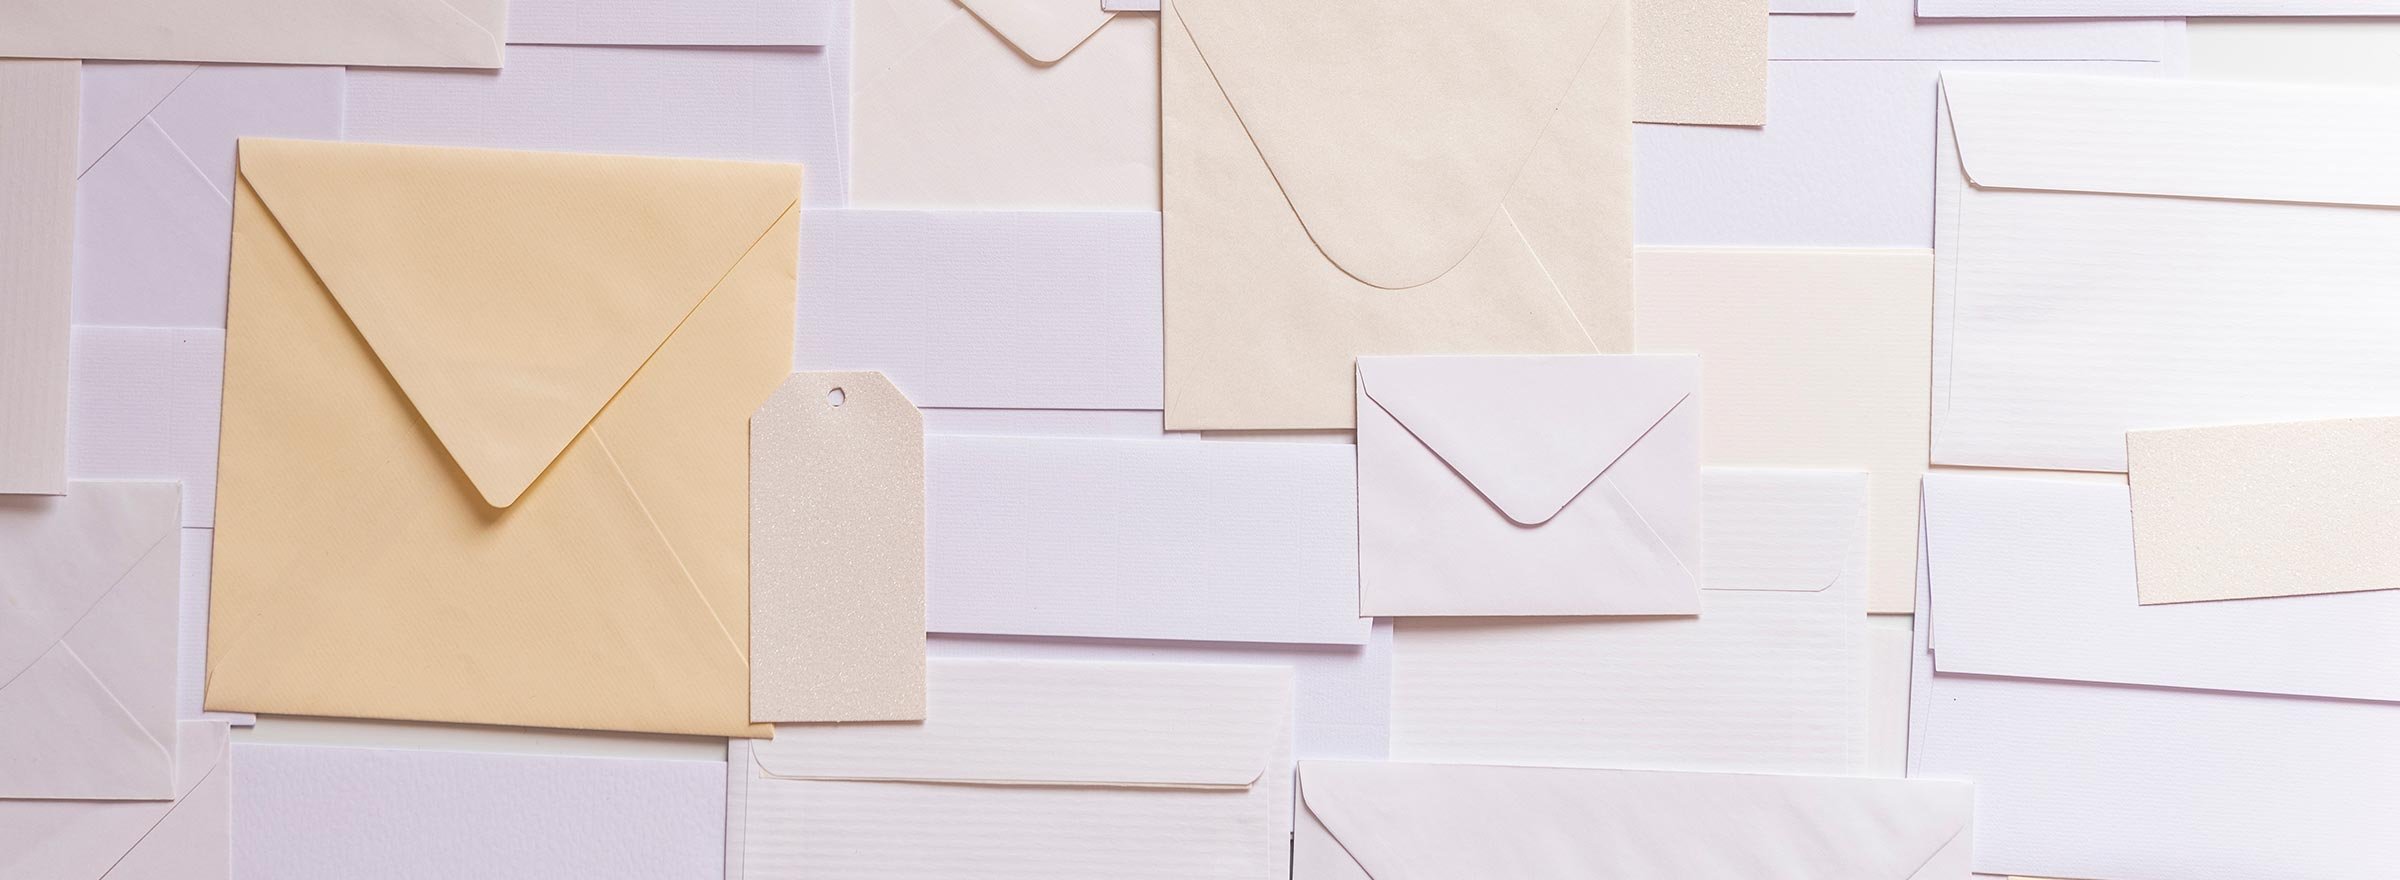 many envelopes of different sizes, representing email marketing for nonprofits